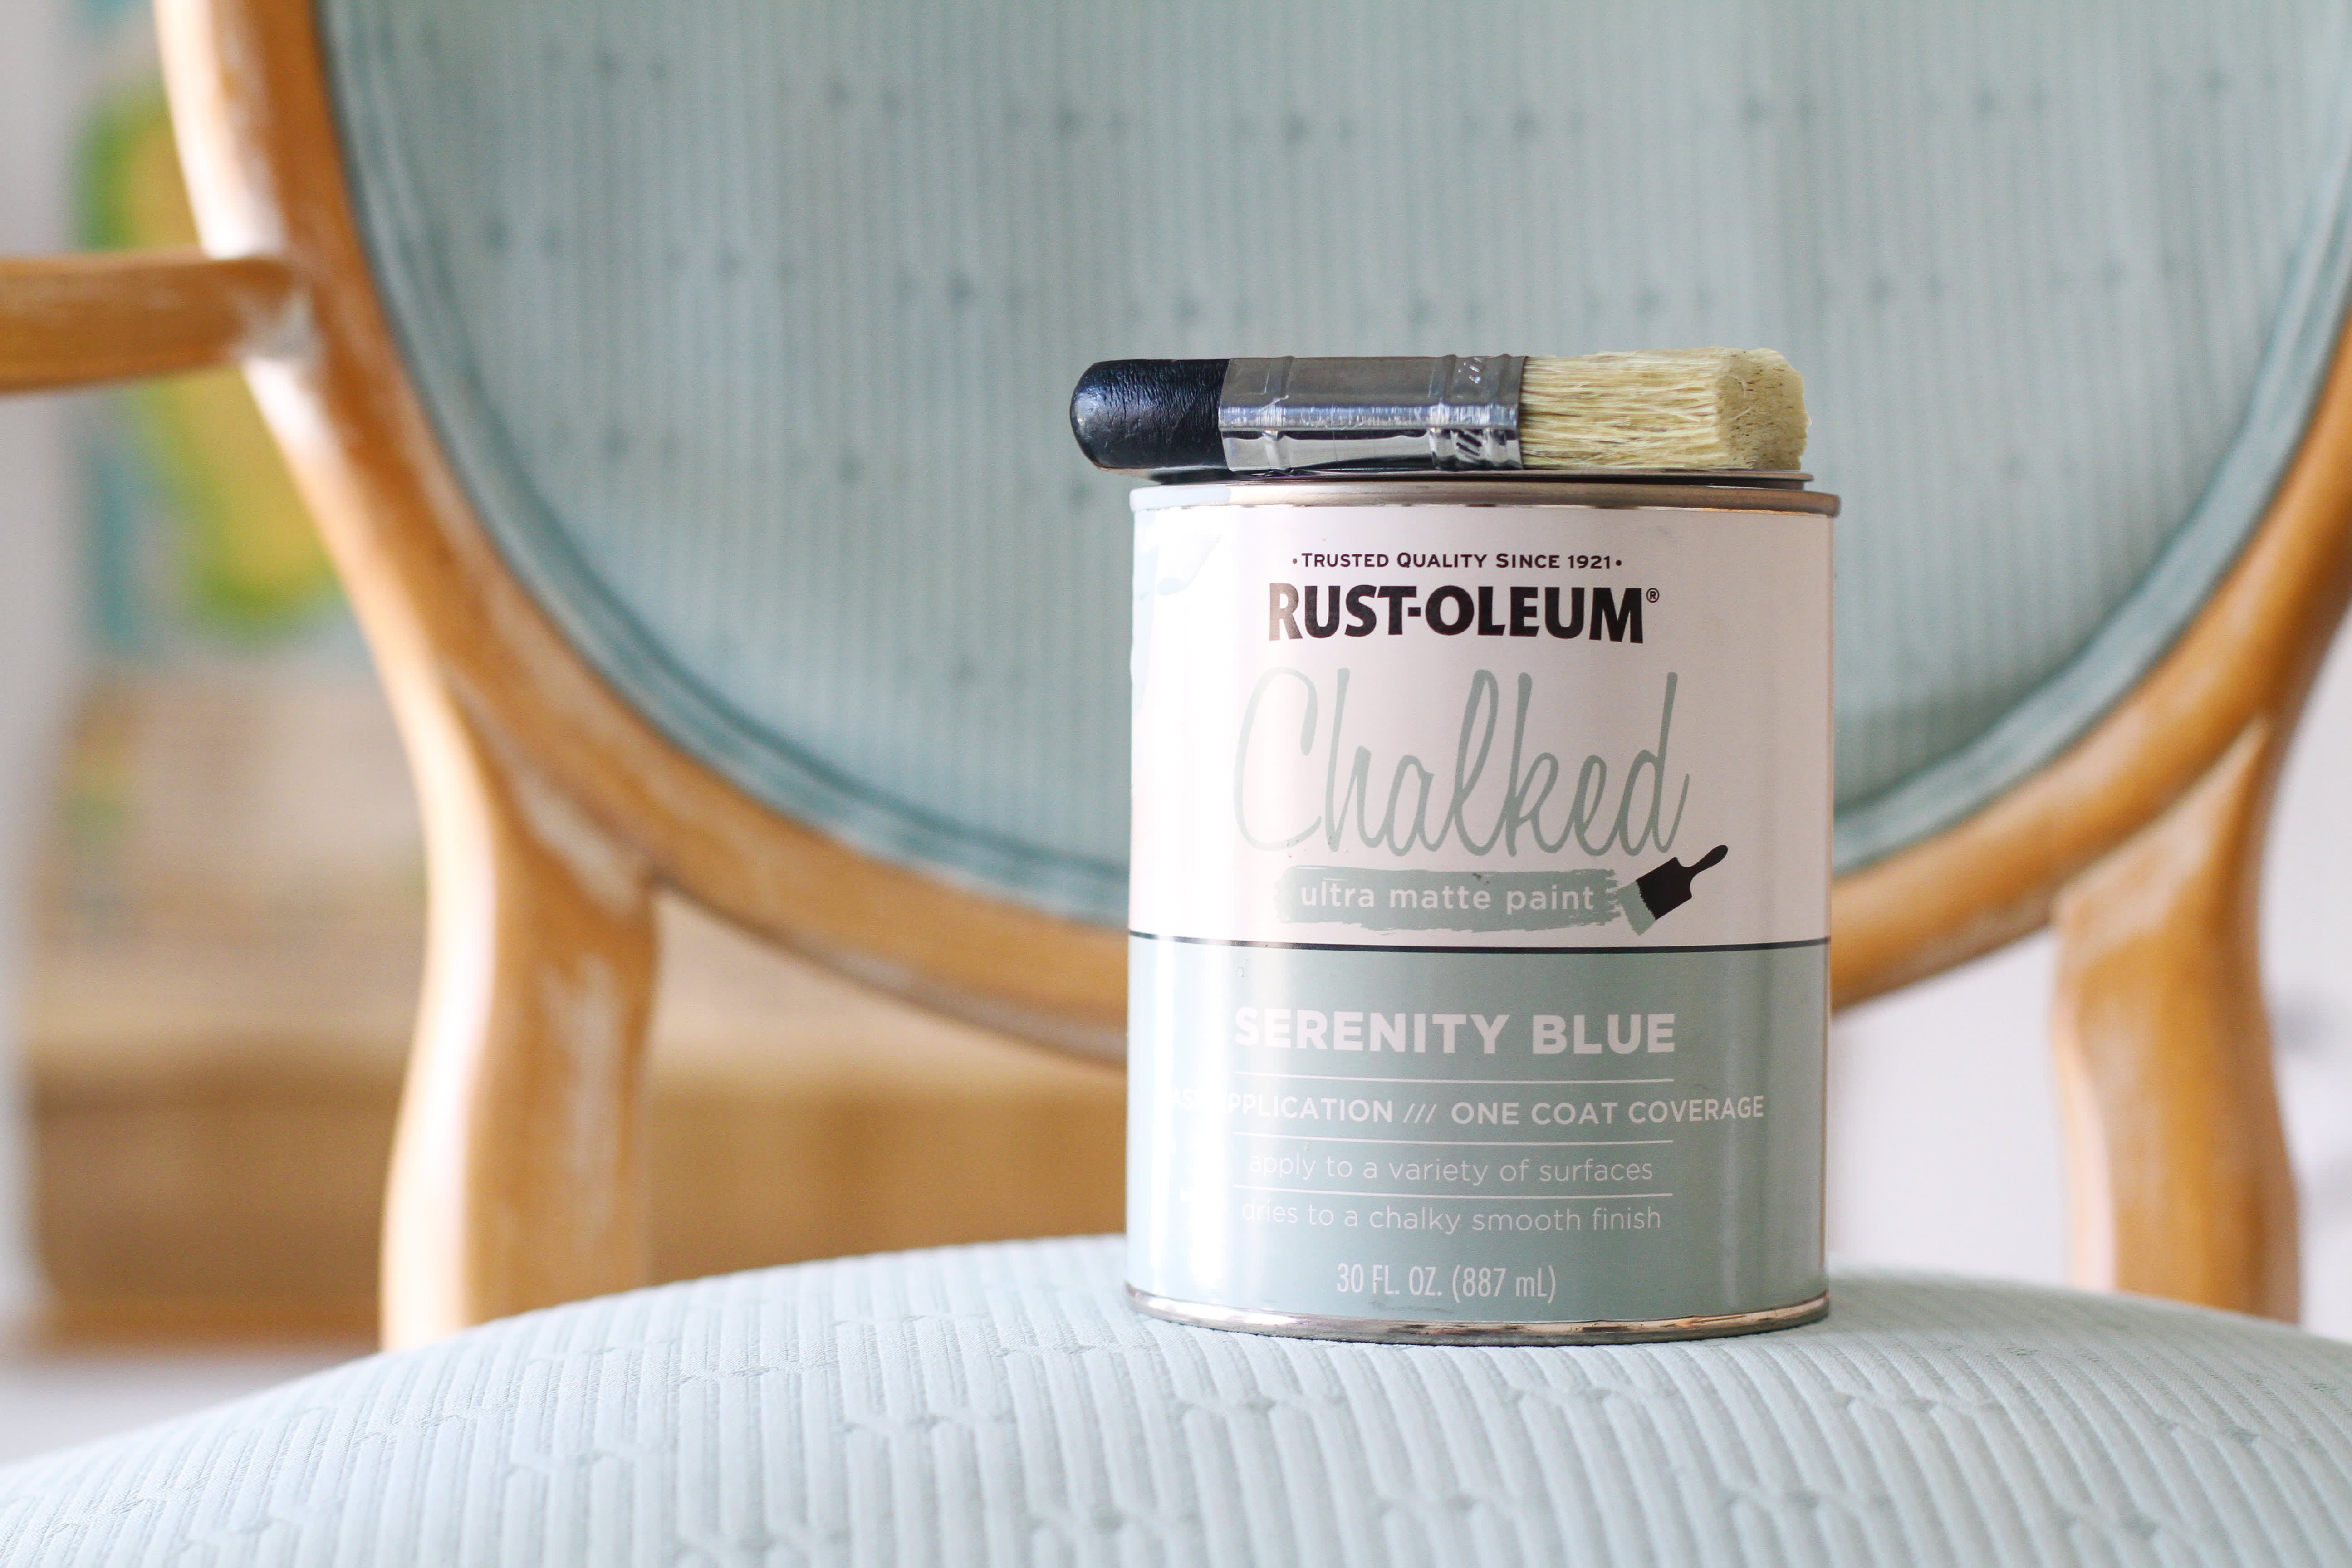 How to Apply Rust-Oleum Chalkboard Paint 